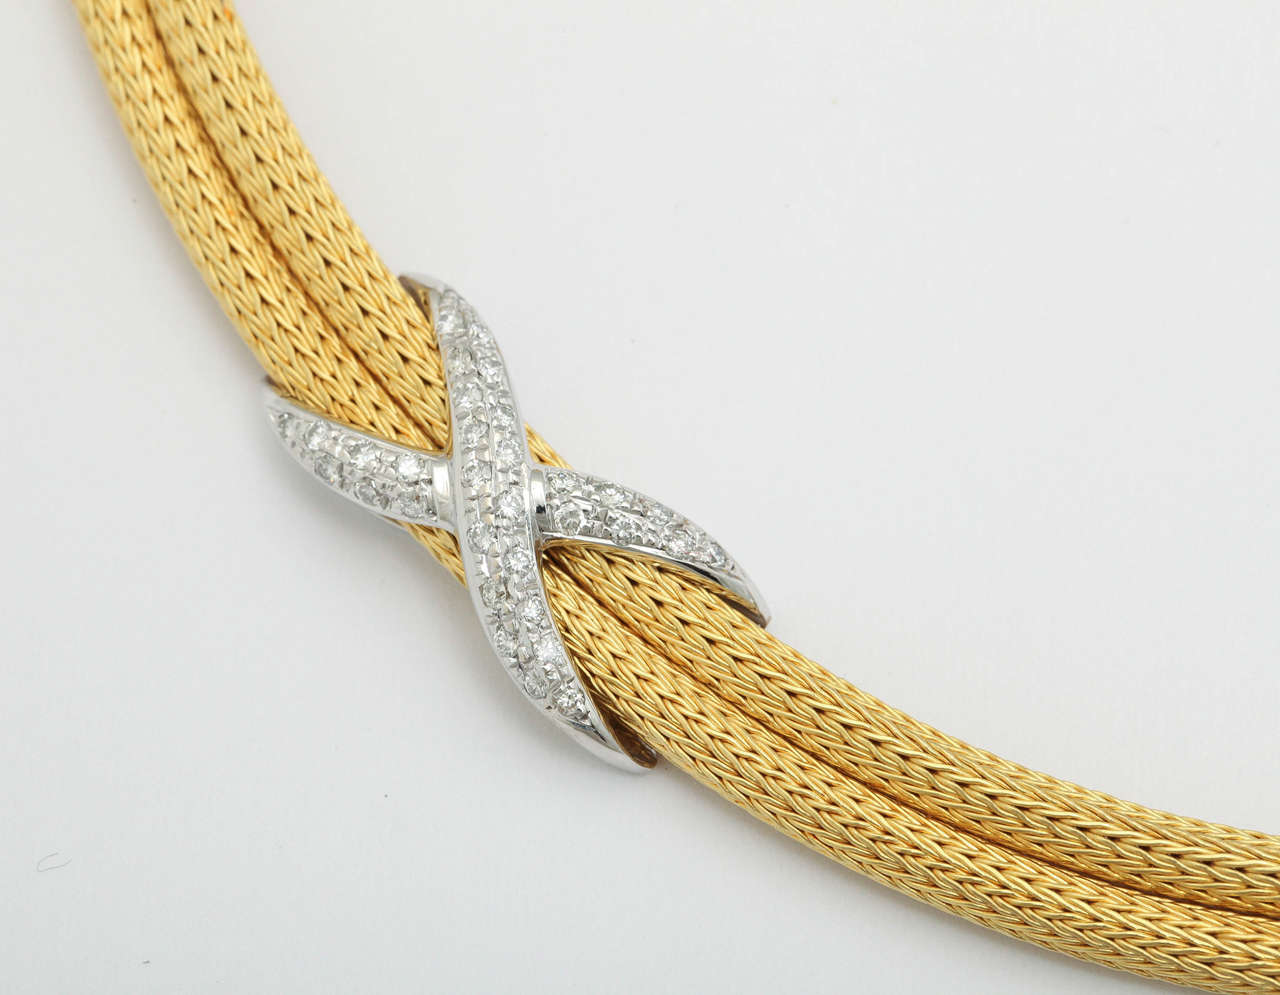 Woven Gold Necklace with Diamond Criss Cross Adornments 1